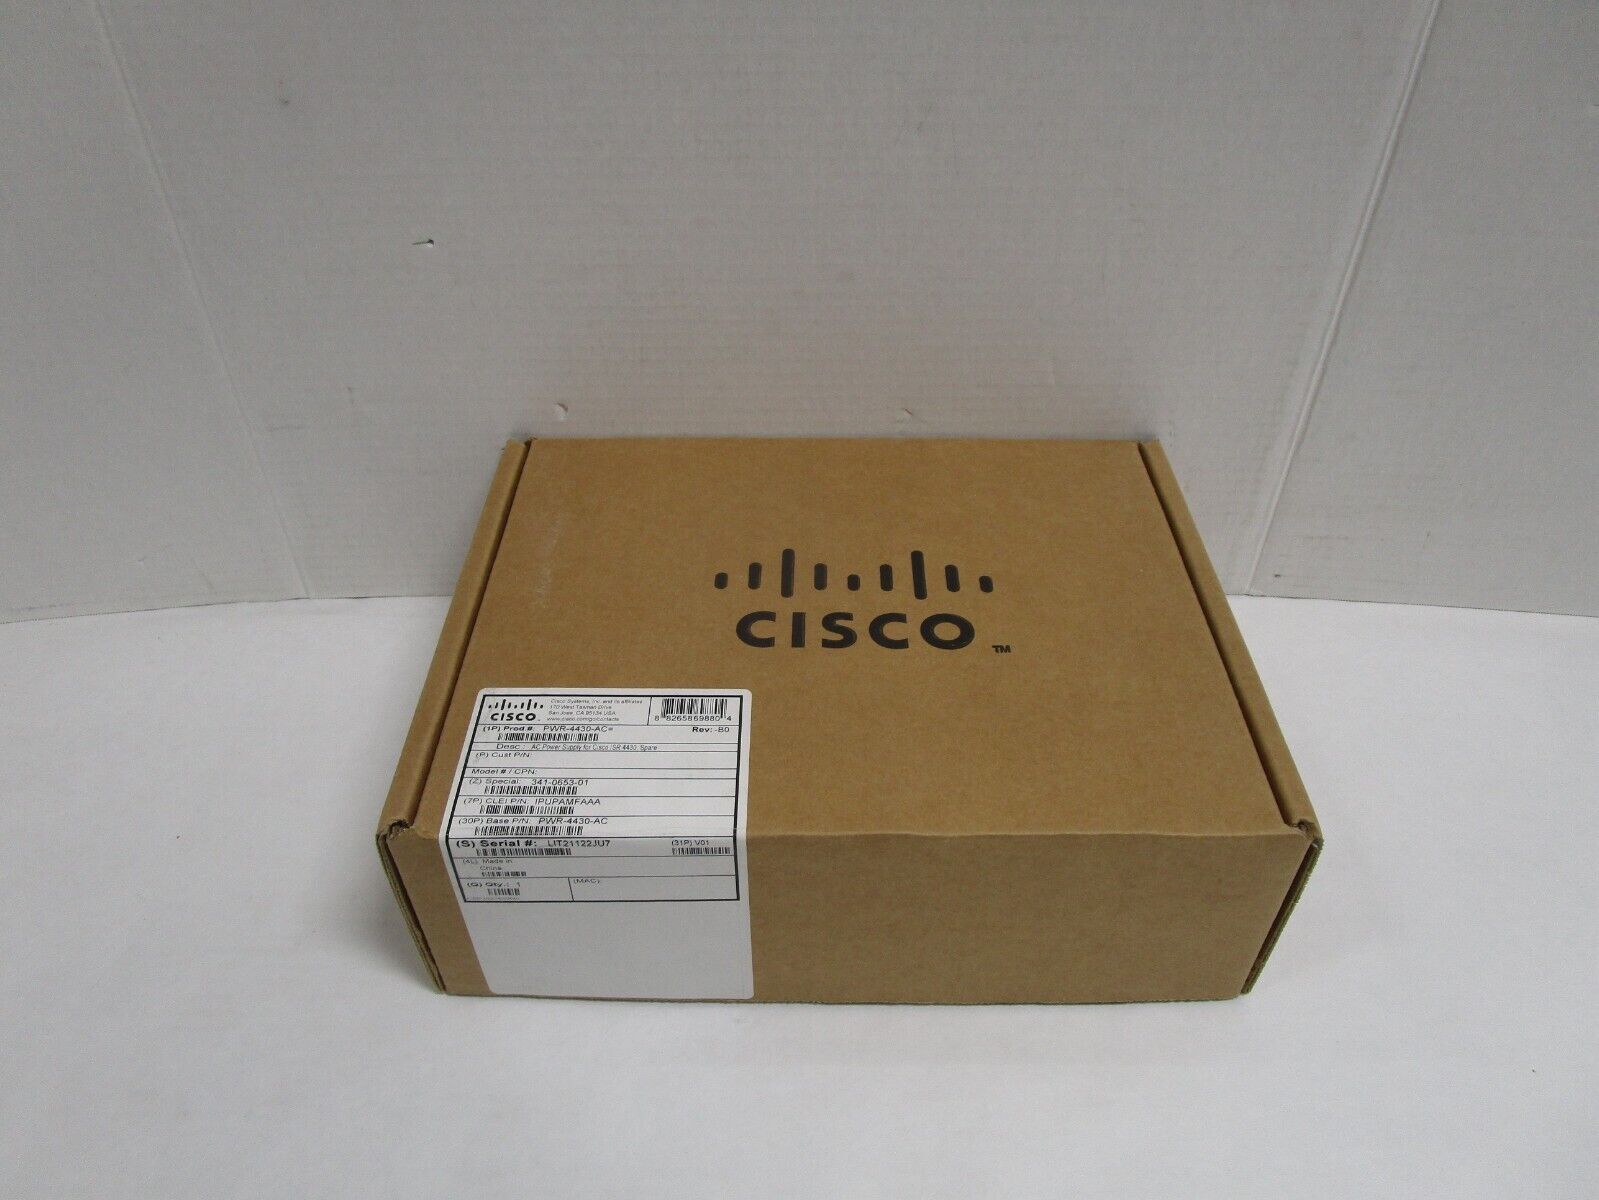 CISCO PWR-4430-AC V01 Power supply For Cisco ISR4430 NEW SEE PHOTOS SHIPS FREE